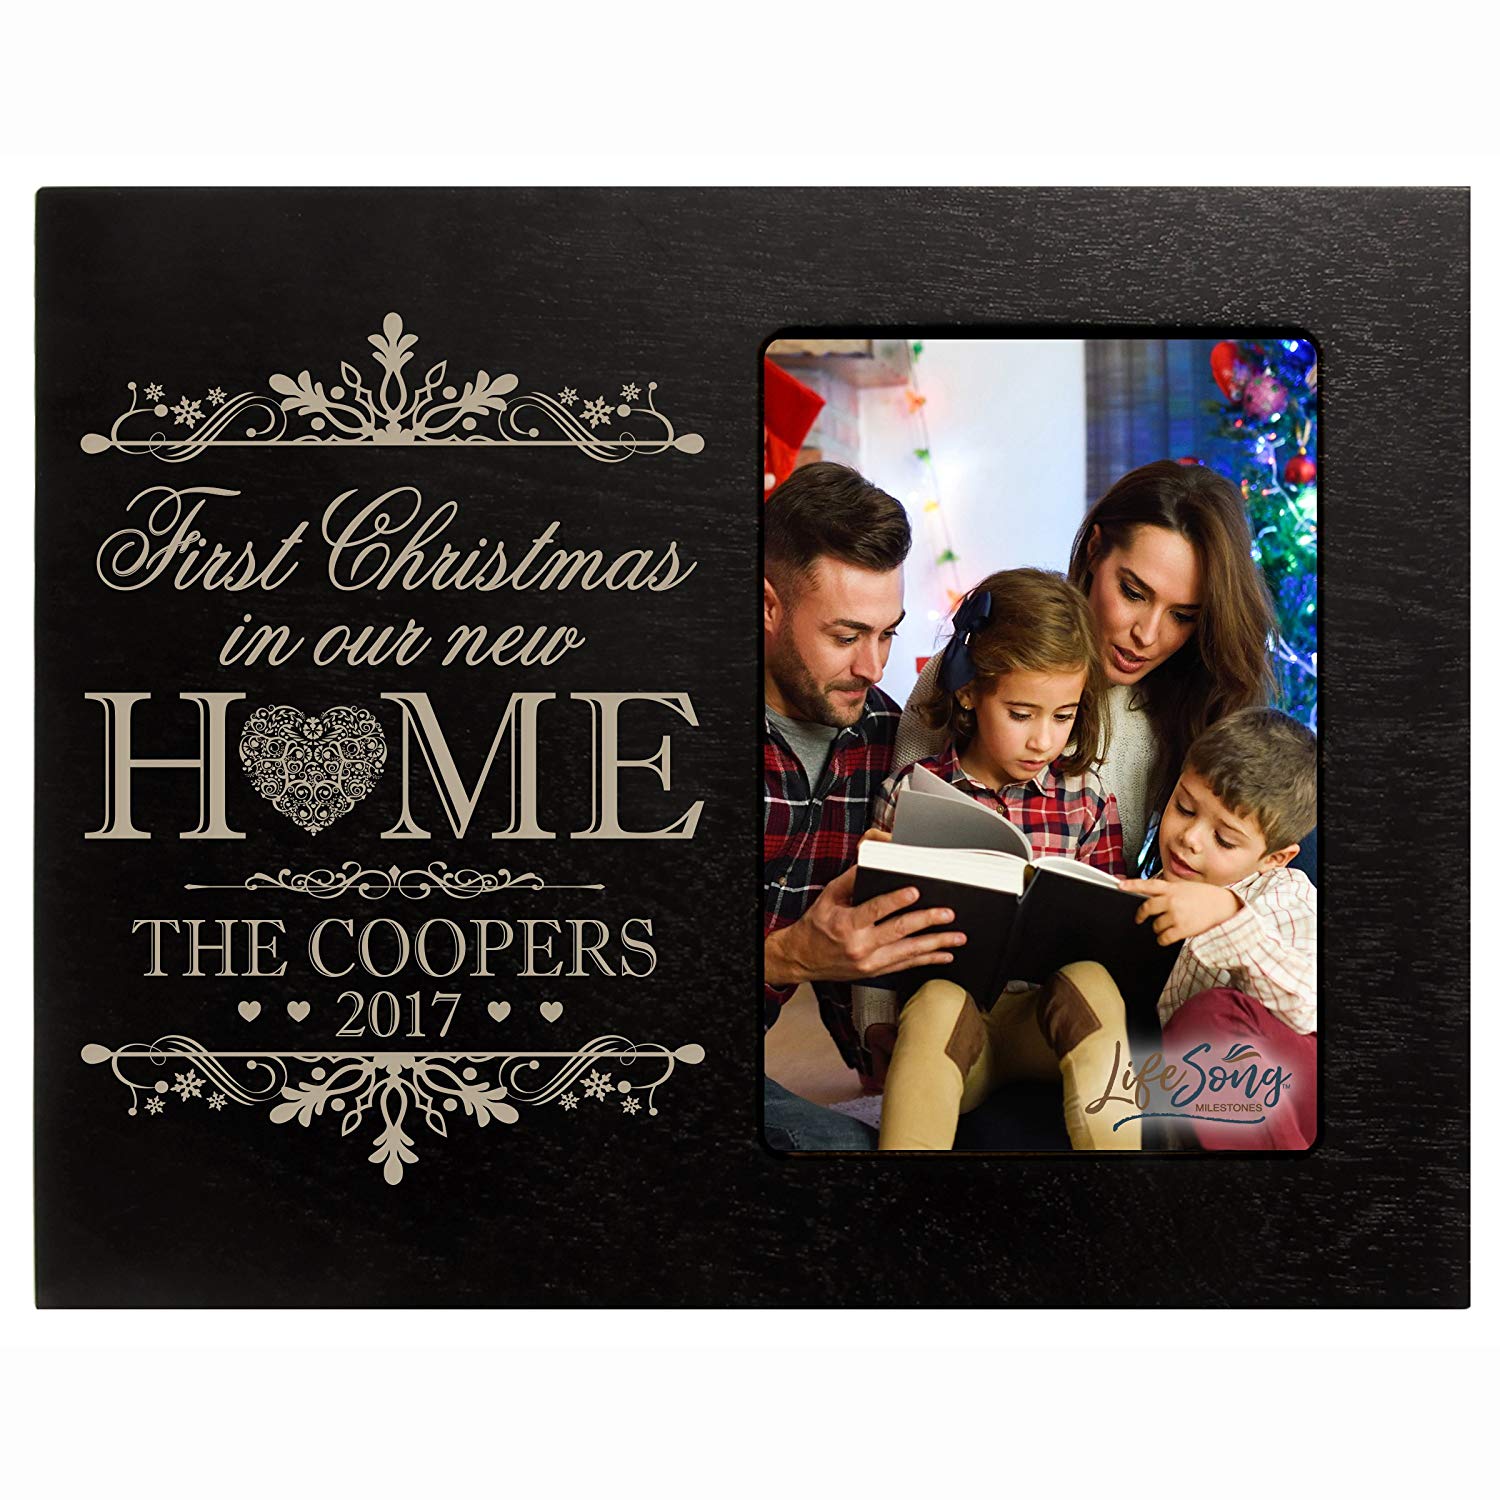 Personalized Home Christmas photo frame holds 4x6 photograph In Our New Home - LifeSong Milestones